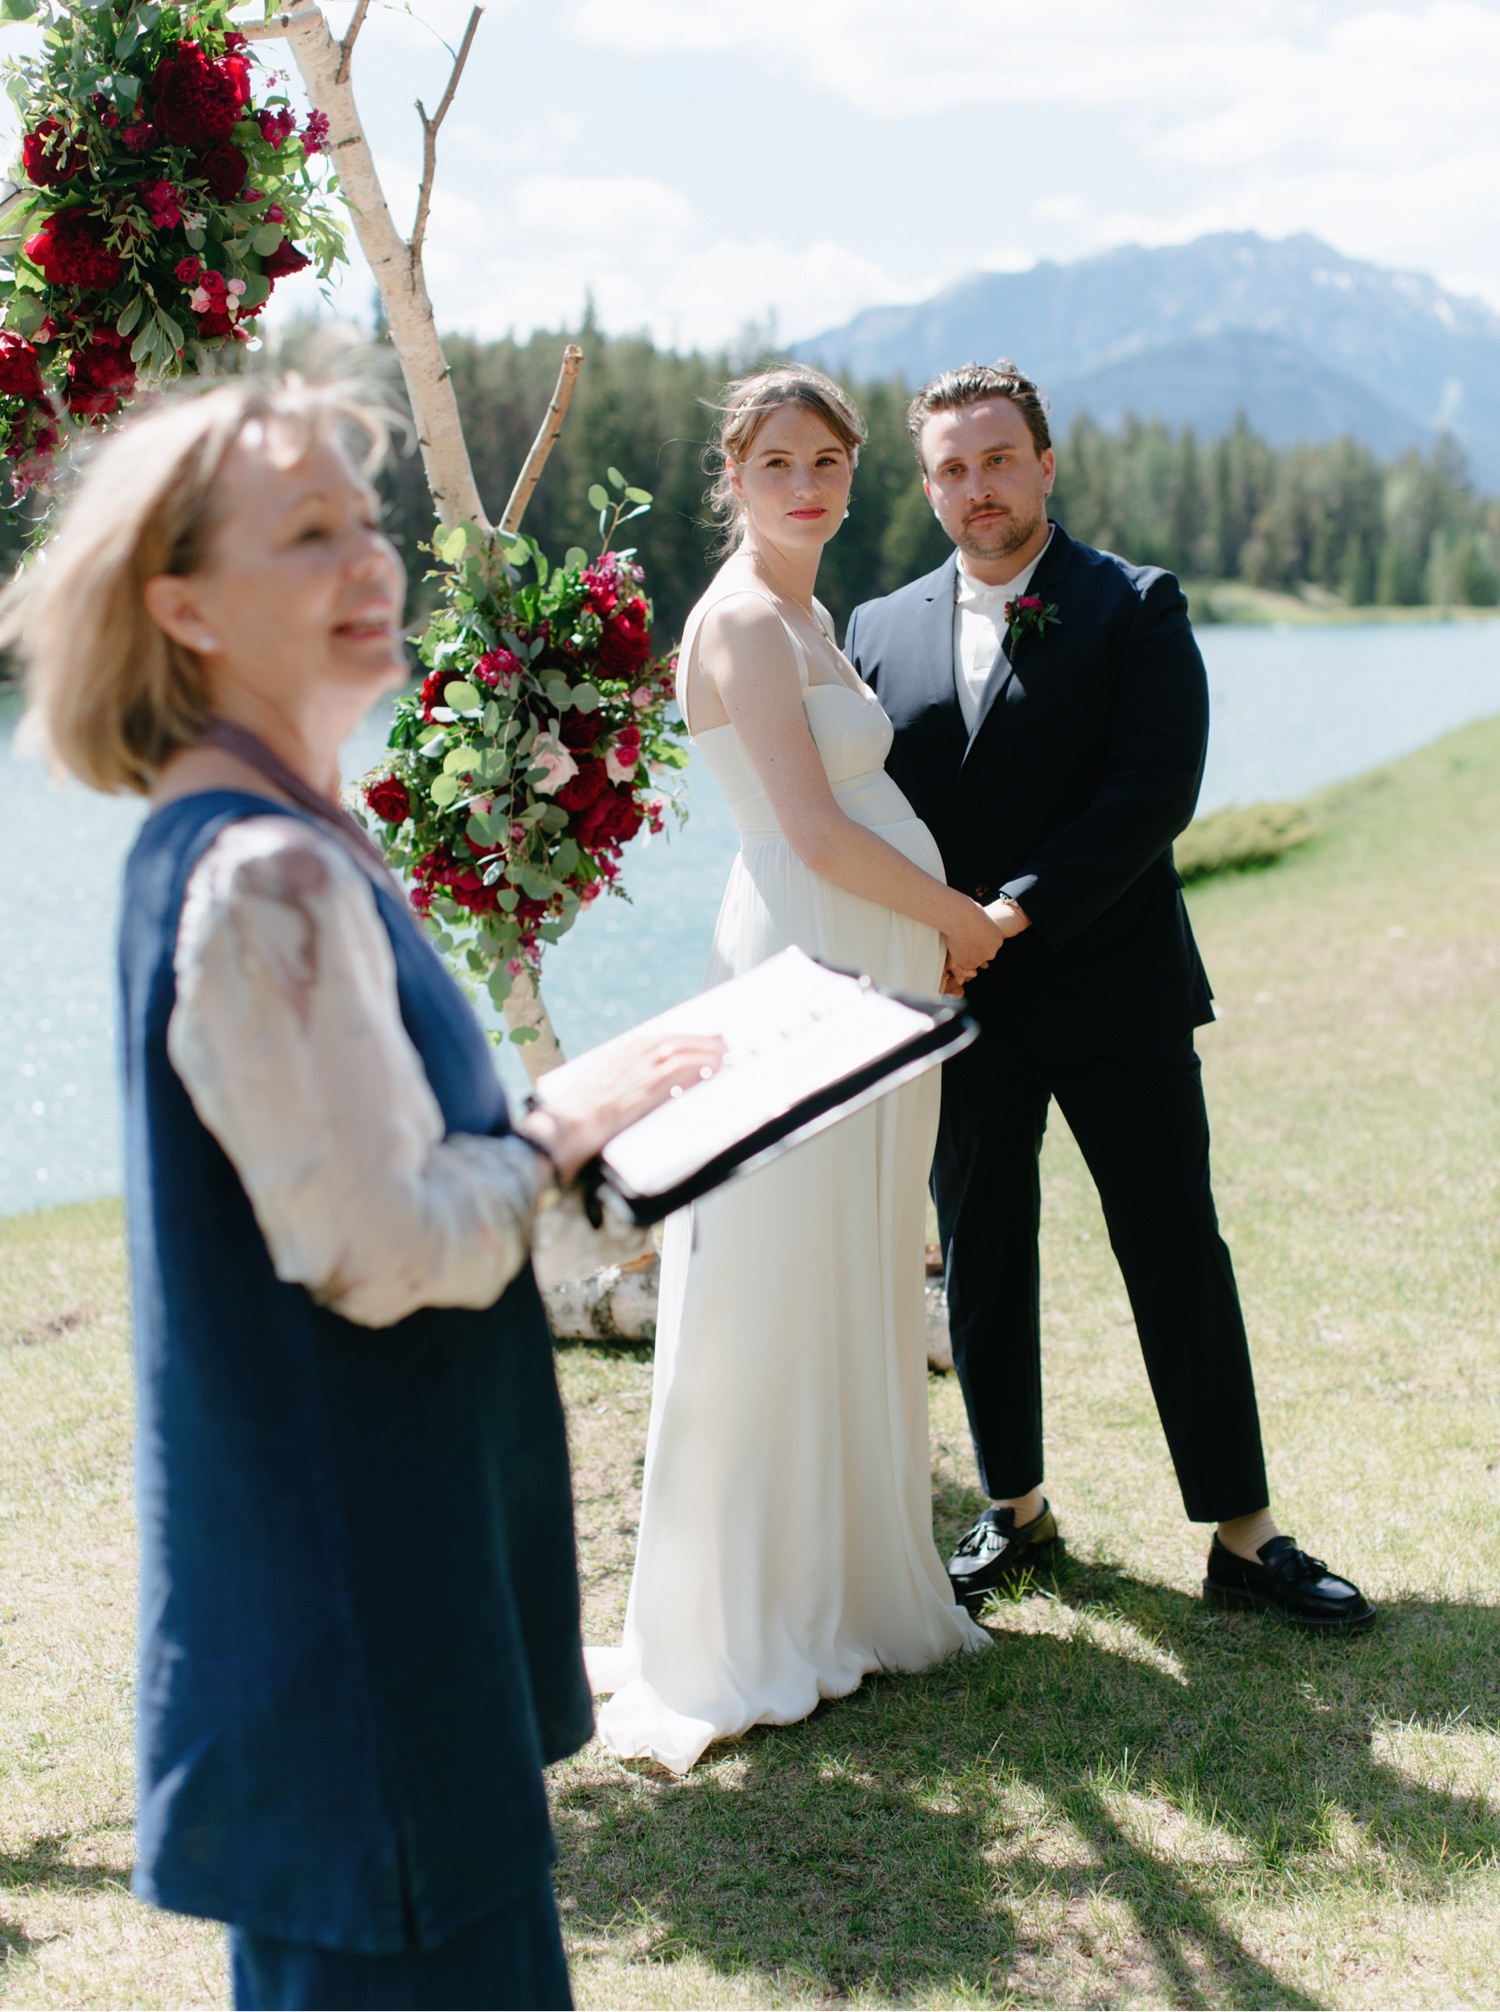 Bride wearing Reformation dress and groom in Hugo Boss suit for their Johnson Lake ceremony